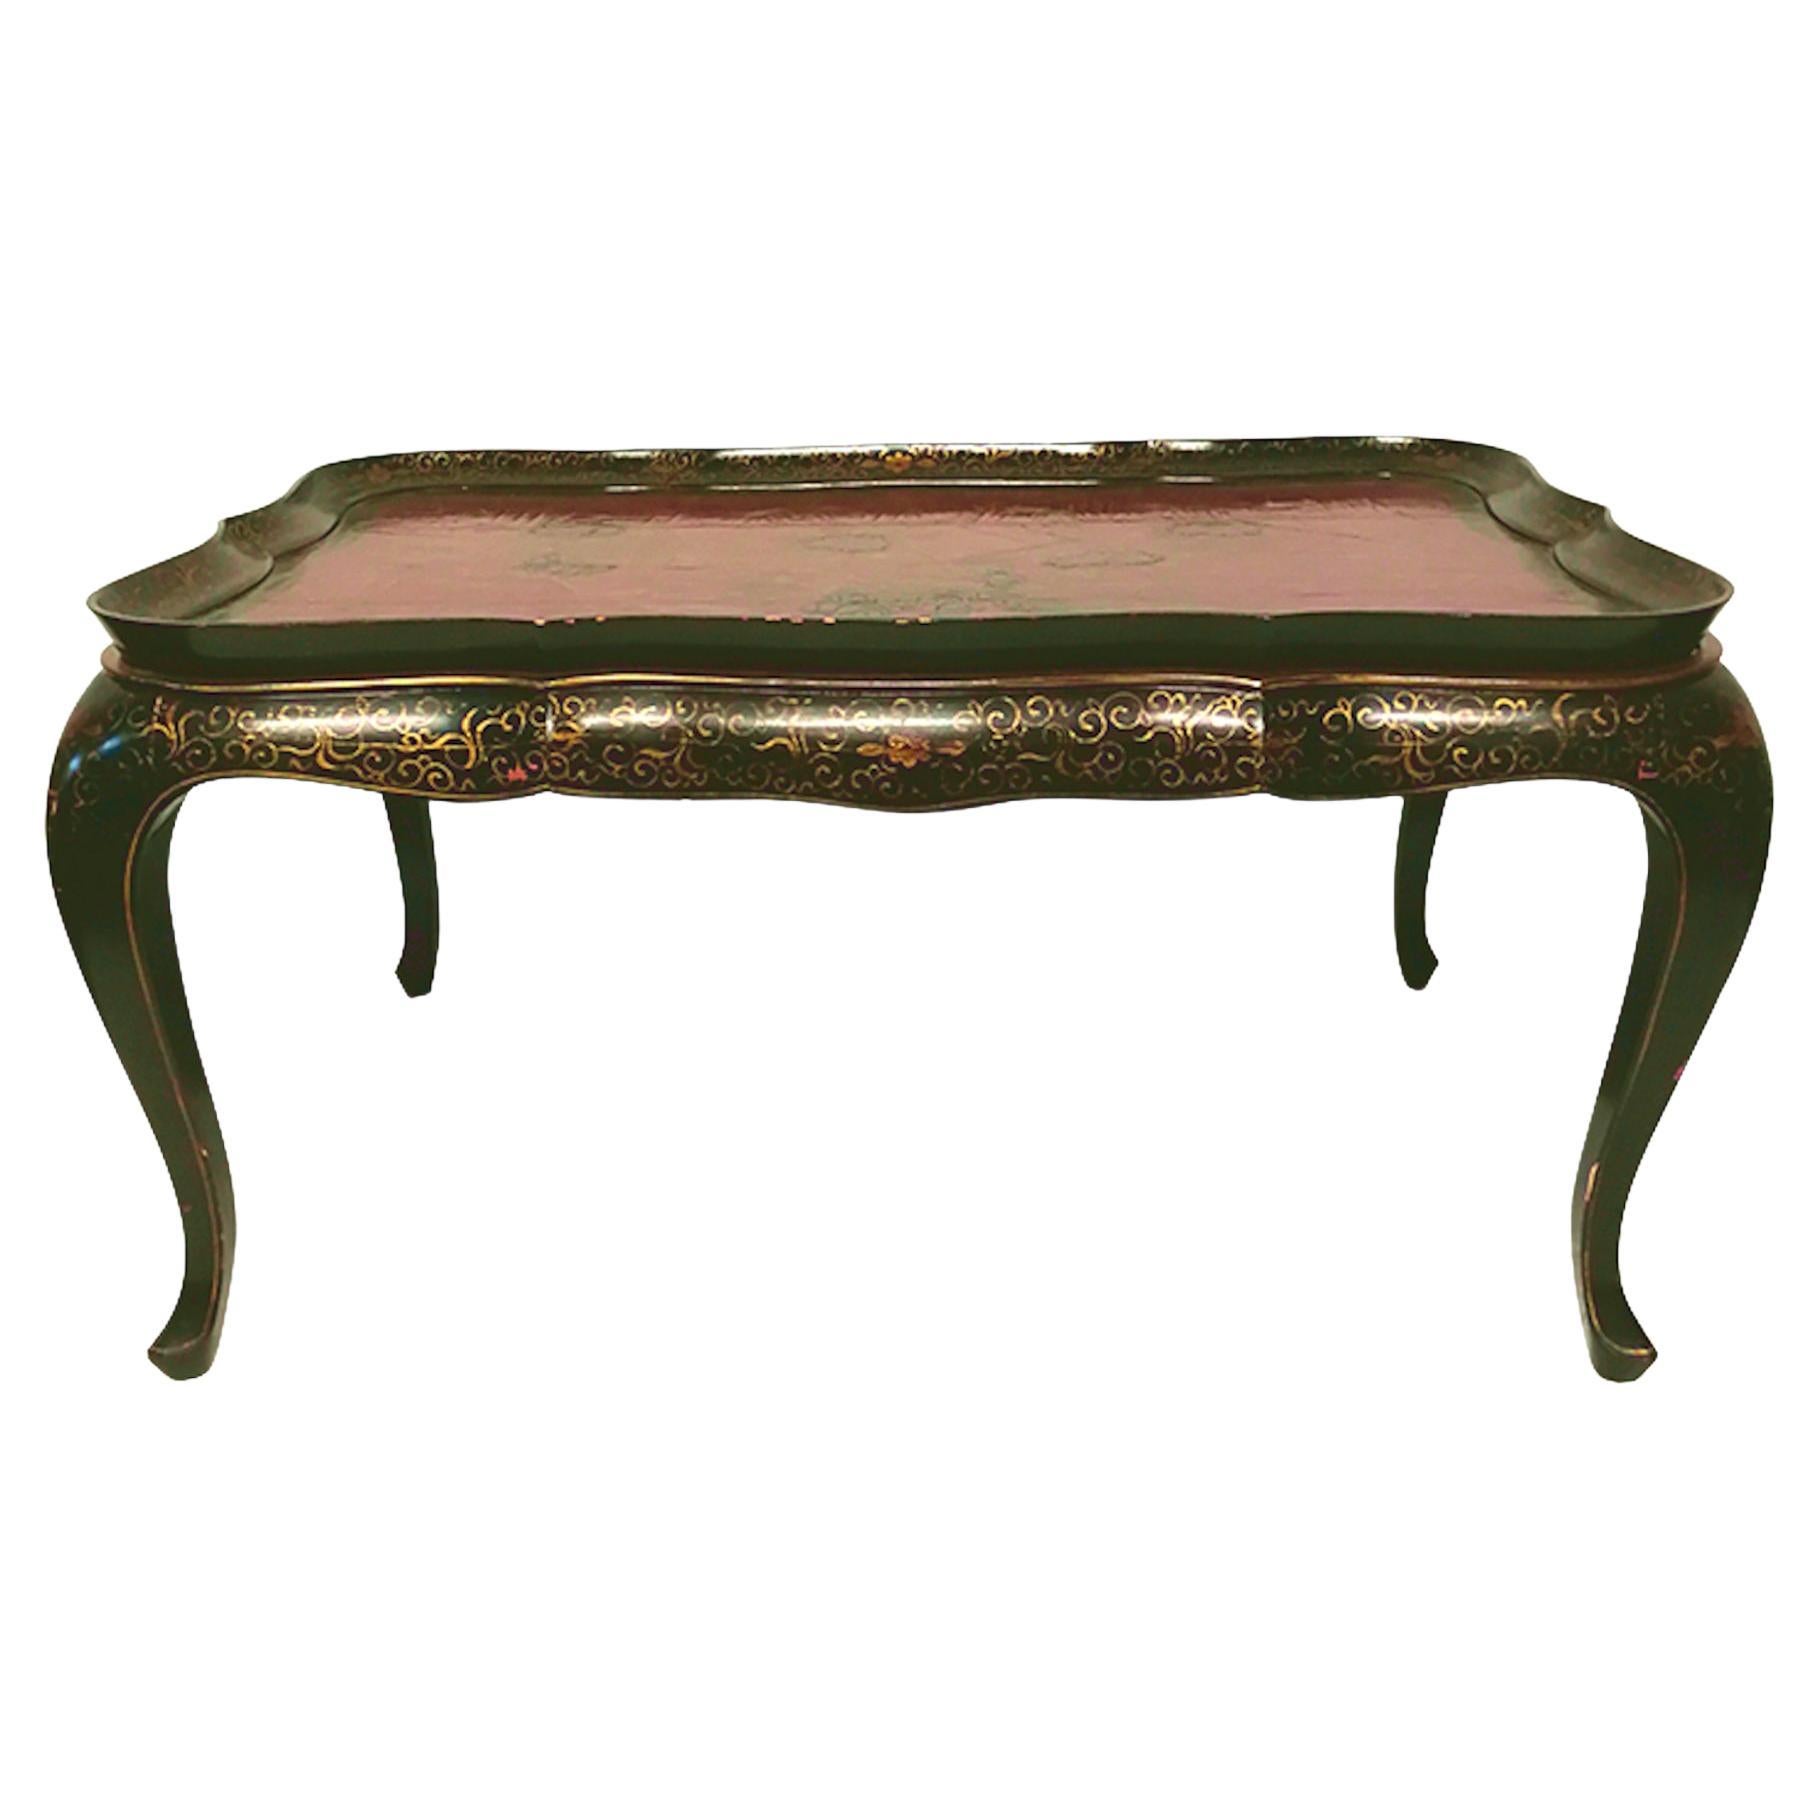 it ® Coffee Table Low Celestial Chinese 27x27x27-High Quality Etnicart 